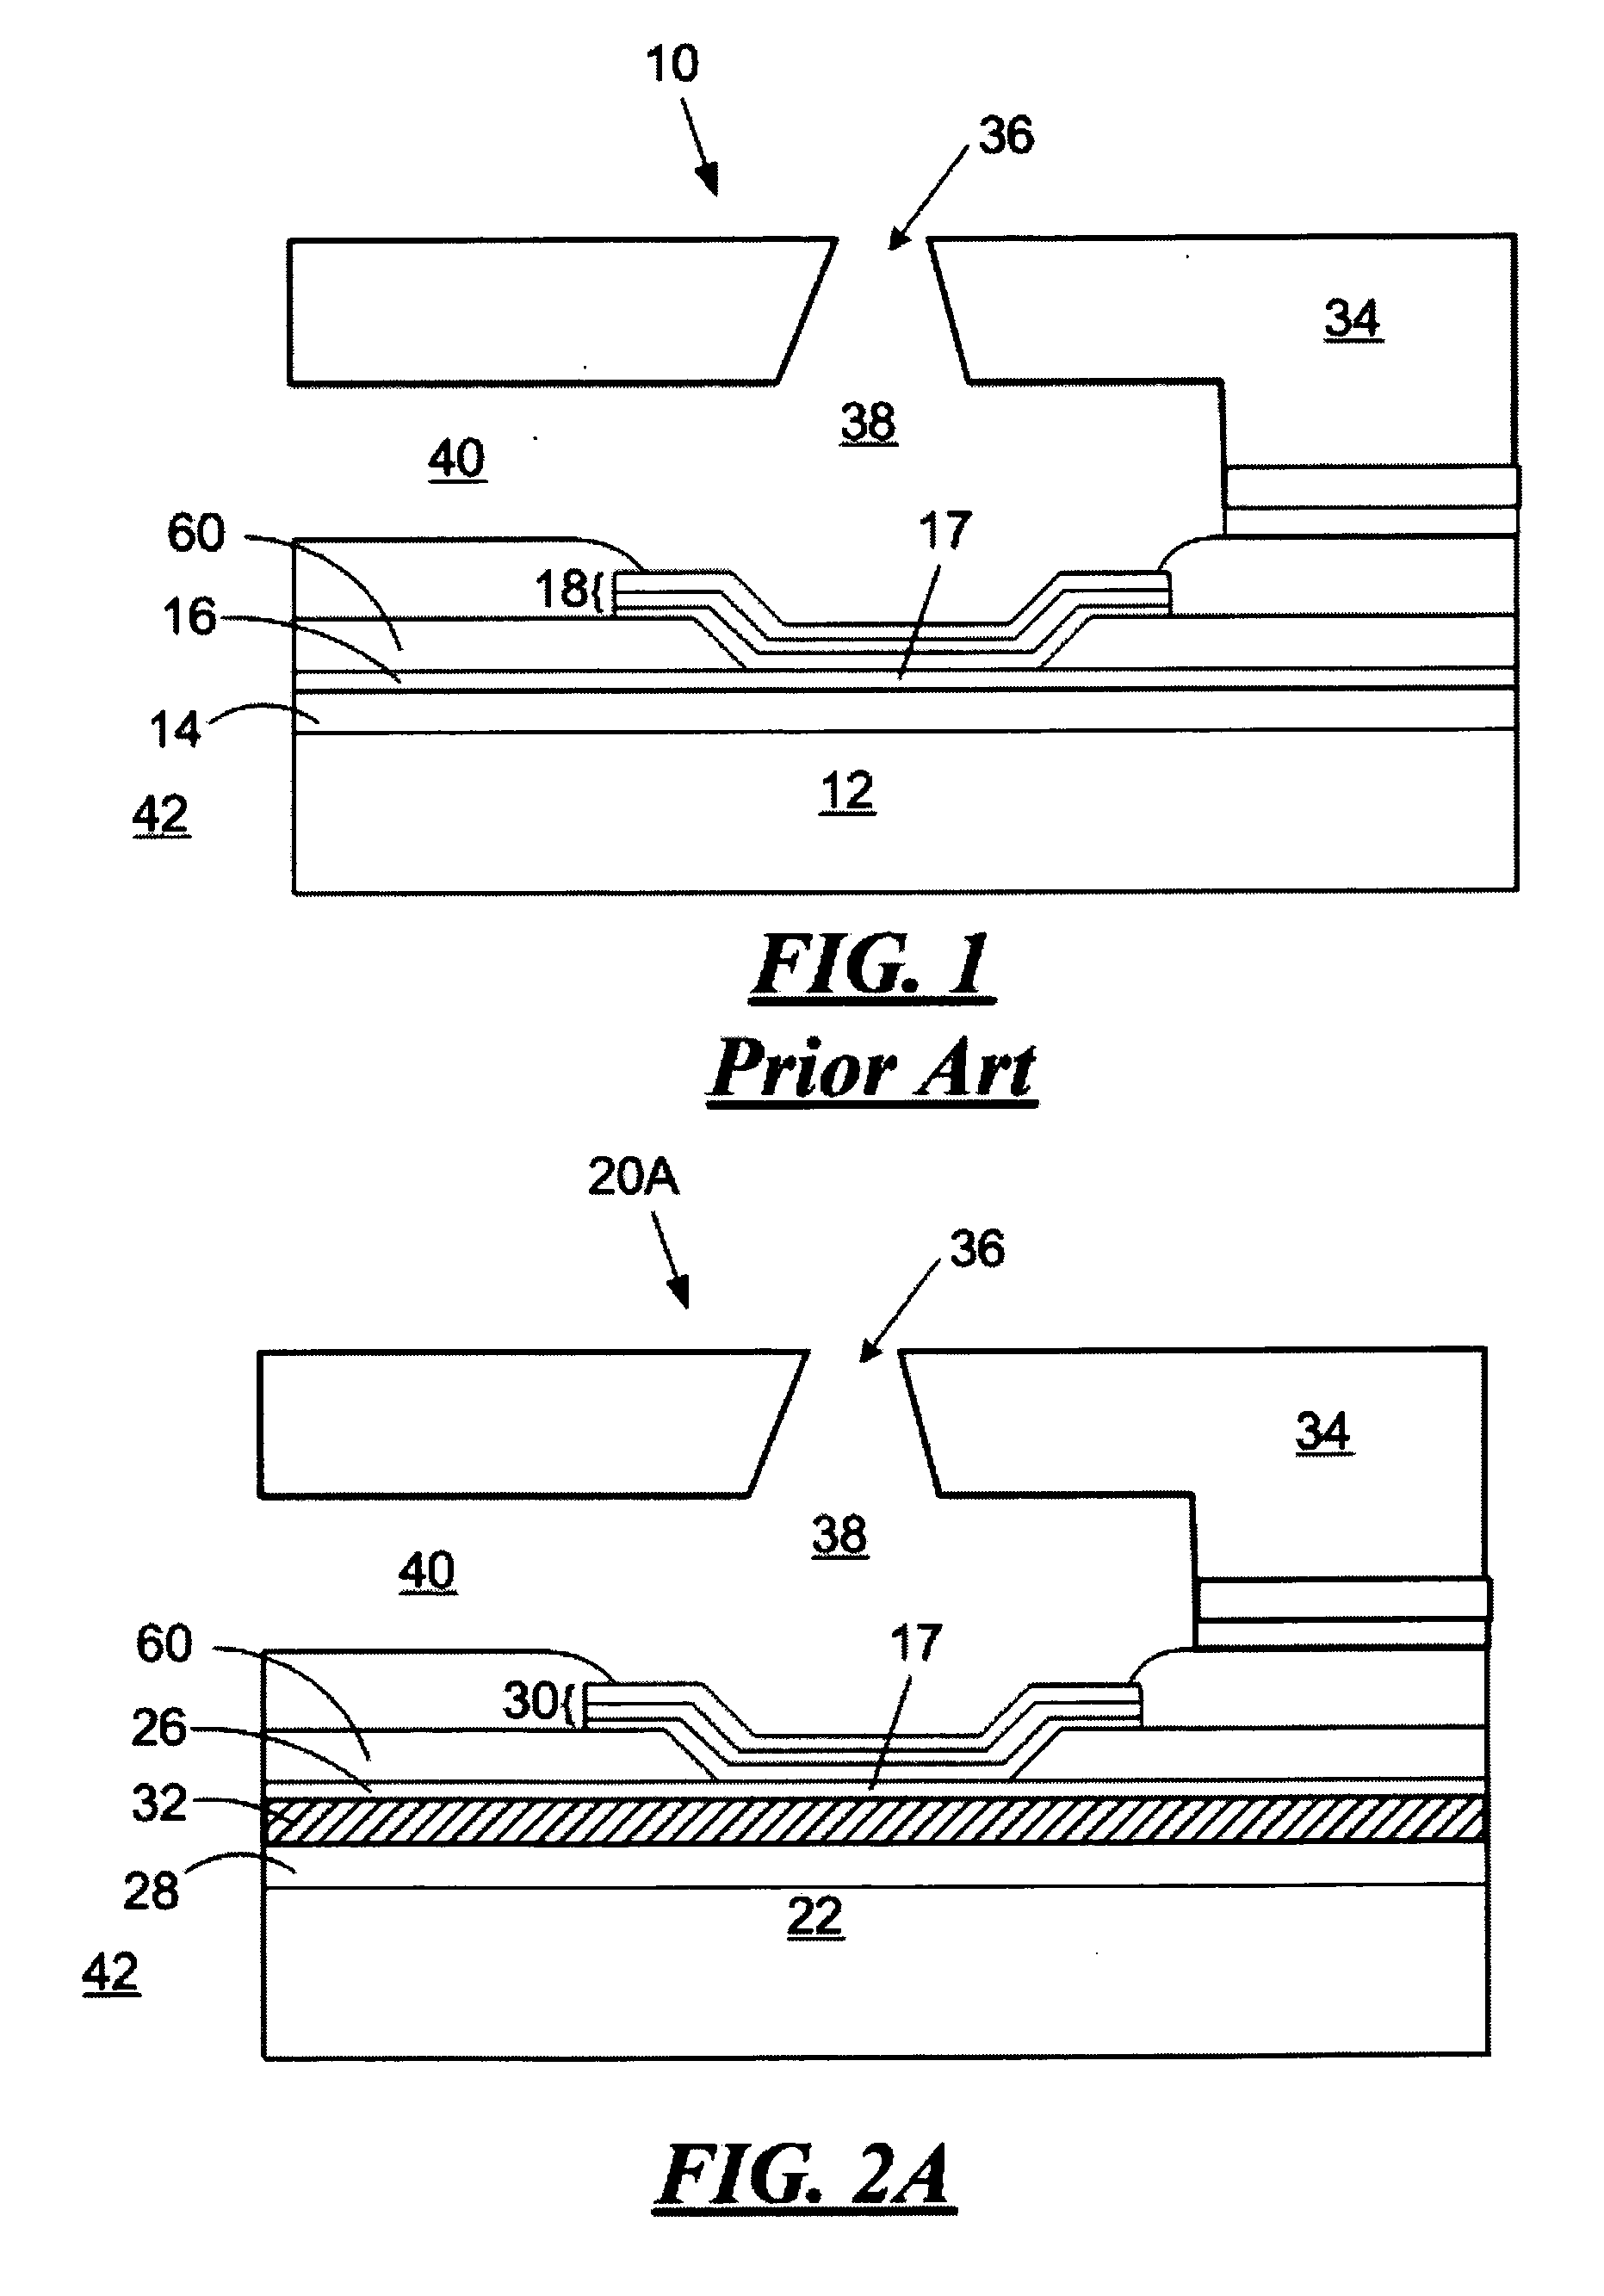 Reduction of heat loss in micro-fluid ejection devices